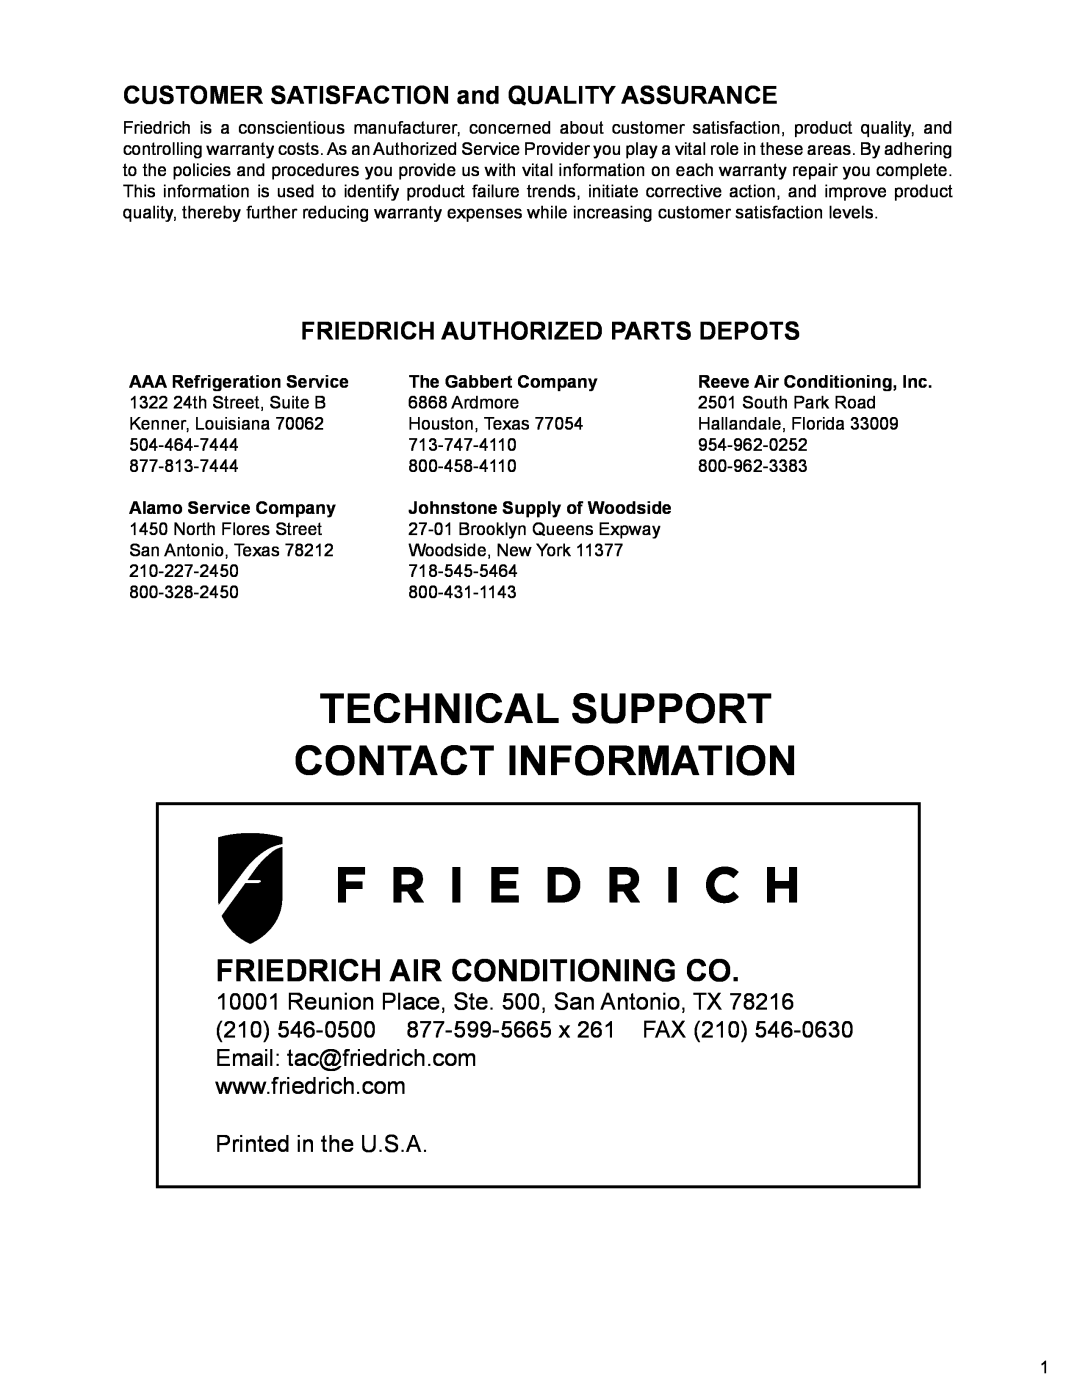 Friedrich MR24Y3H Technical Support Contact Information, CUSTOMER SATISFACTION and QUALITY ASSURANCE, The Gabbert Company 